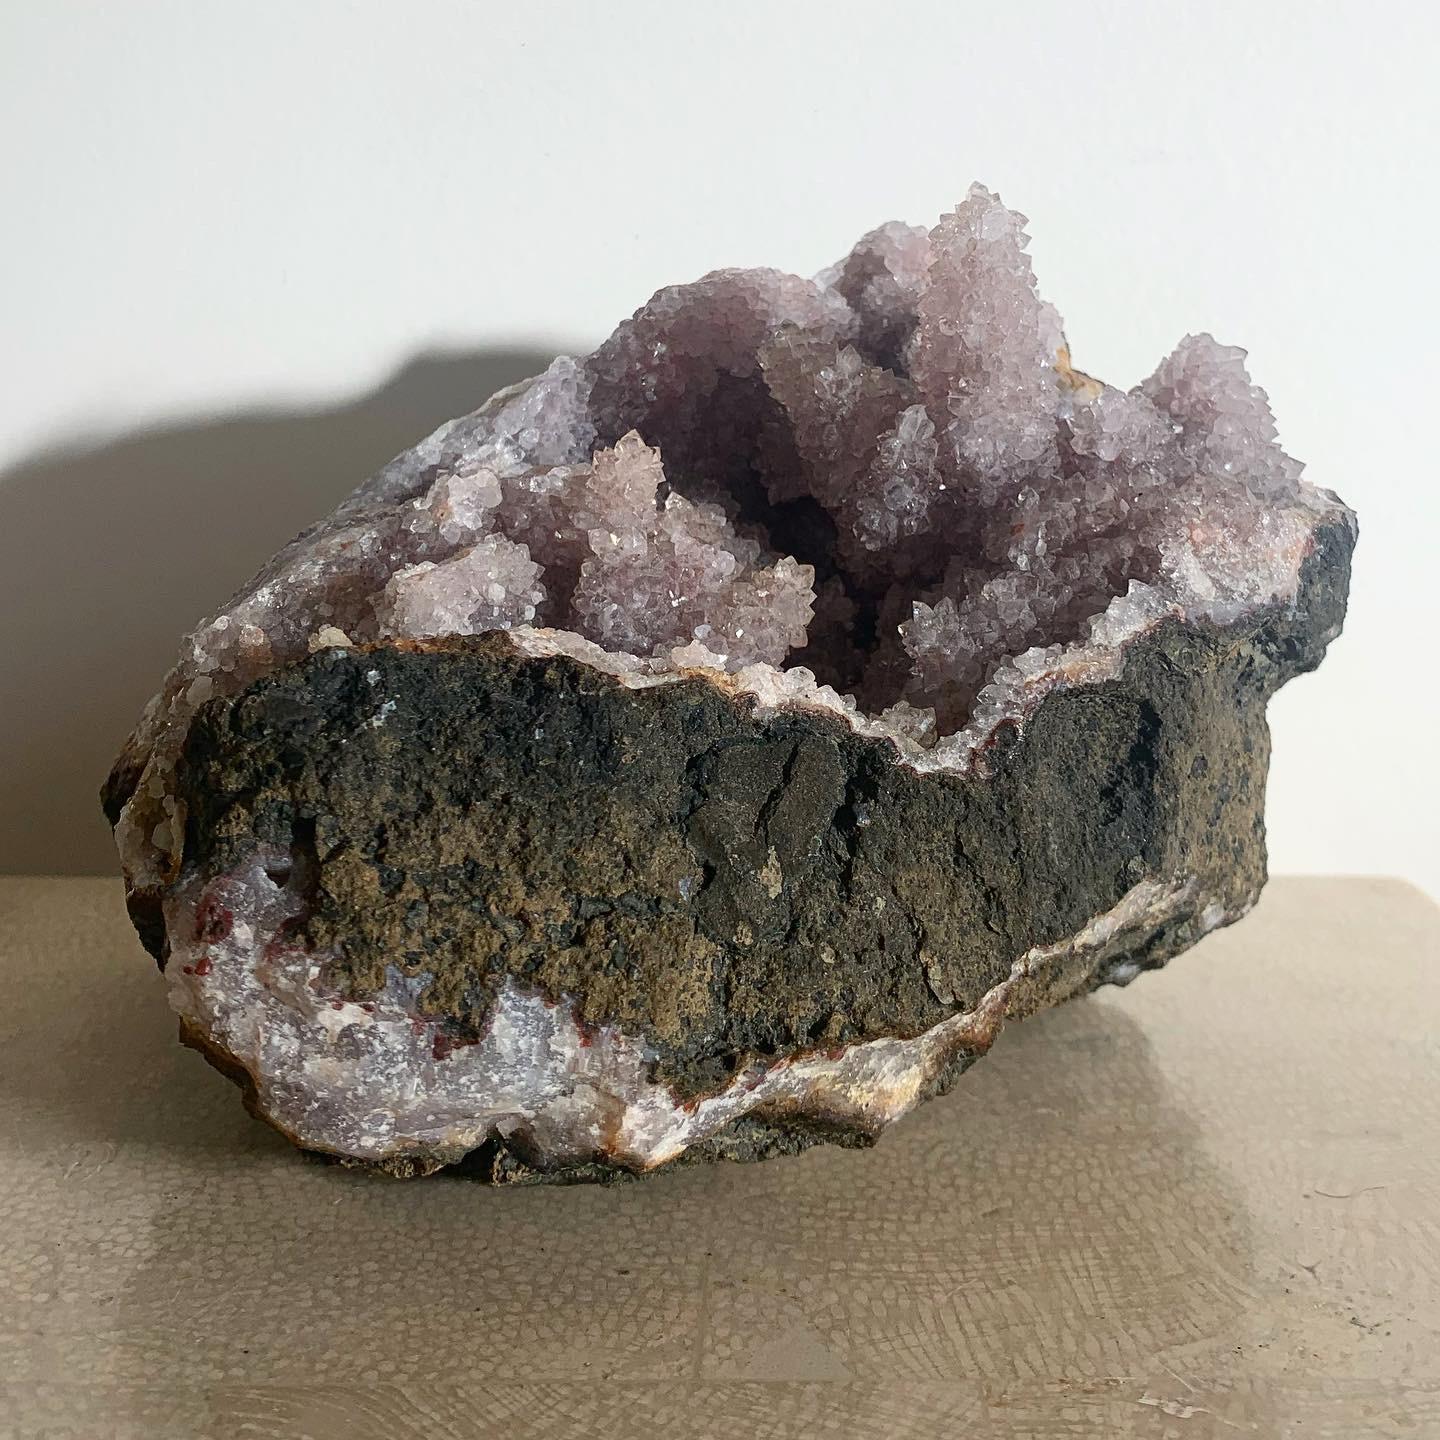 ANCIENT ENERGY: semiprecious cracked geode spilling out glorious amethyst array cradled in rough basalt. This is a TRUE rock formation sculpted from the erupted cleaving of earth many millions of years ago. The true vintage. From the Bel Air estate